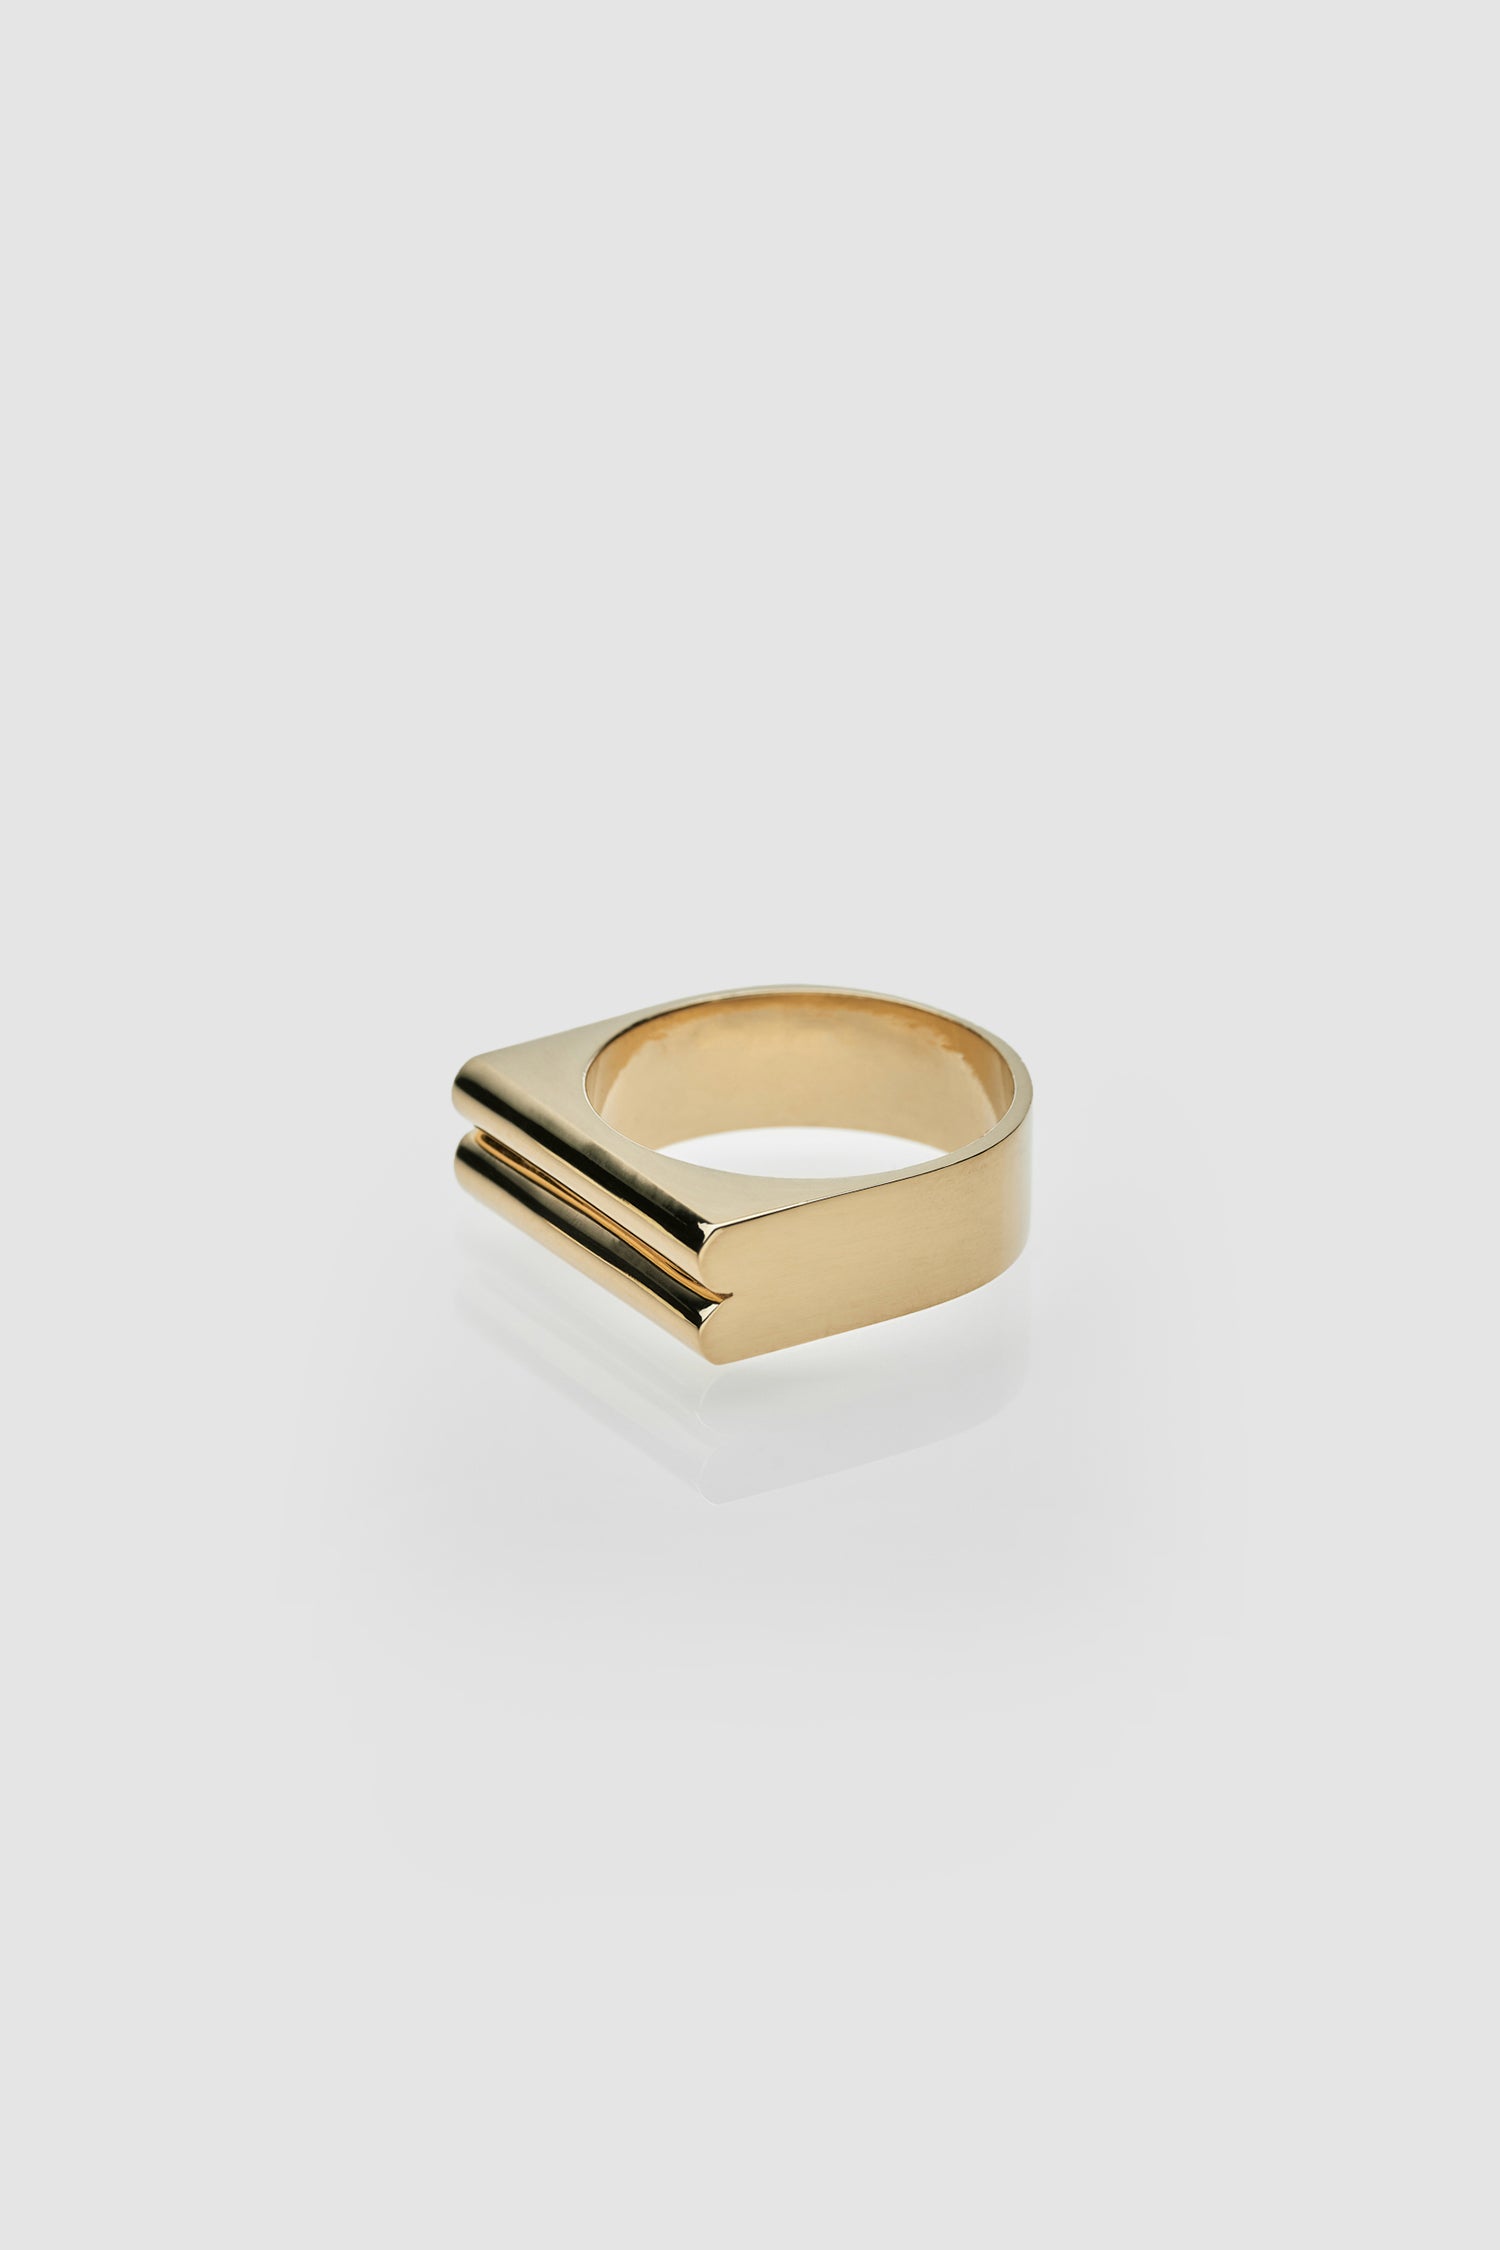 Pelli Ring - Gold Plated